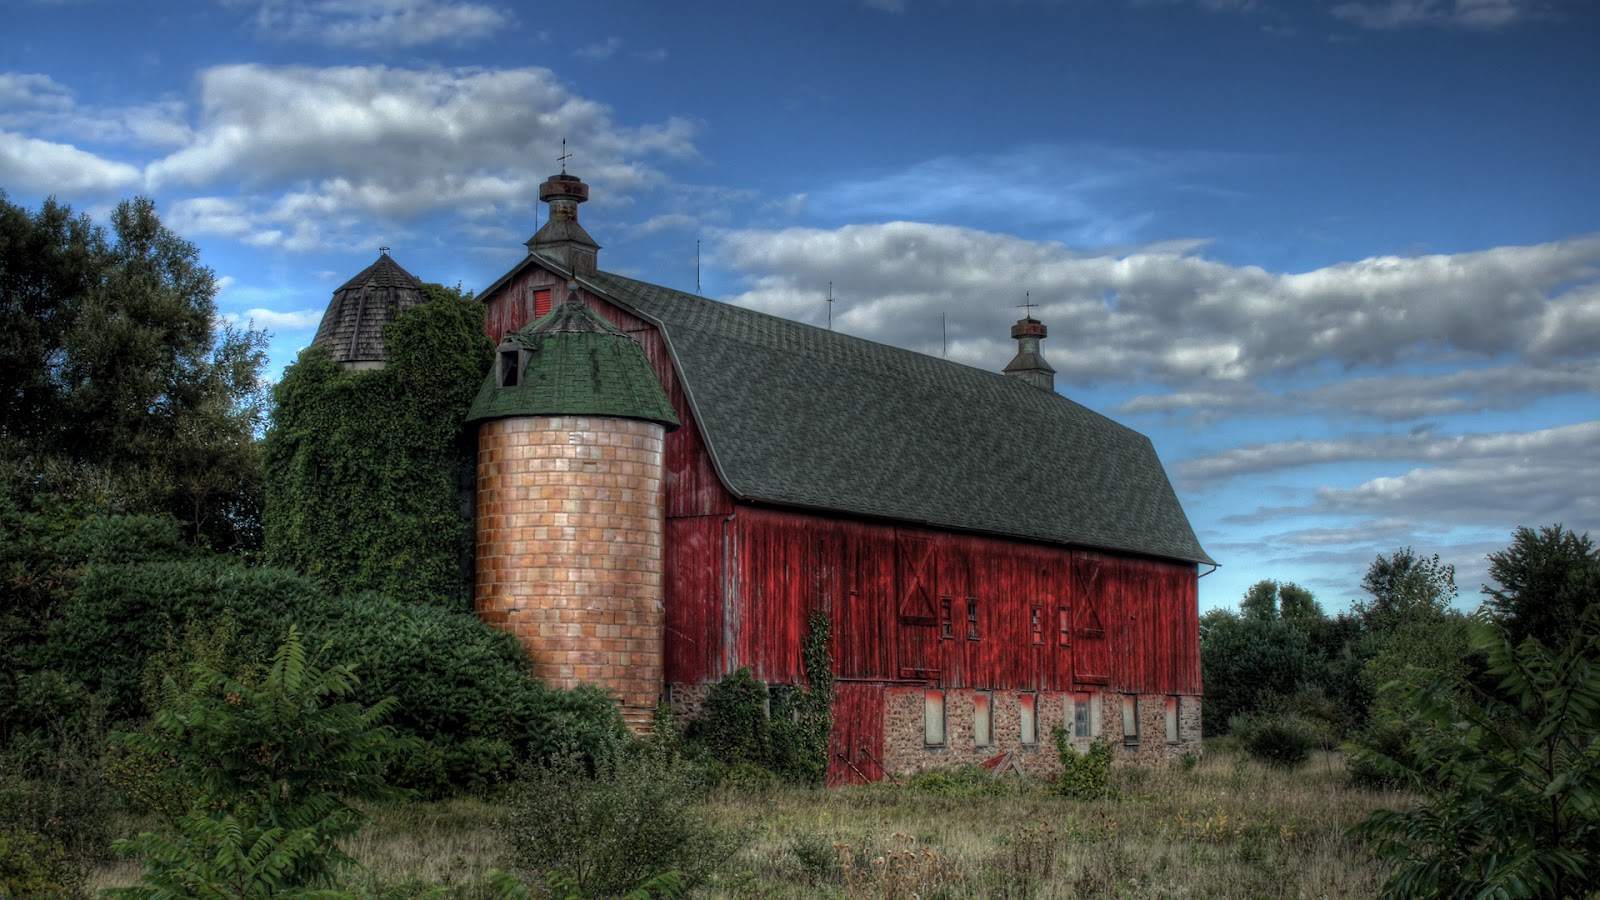 vijay hd wallpapers for windows 7,barn,property,rural area,building,roof